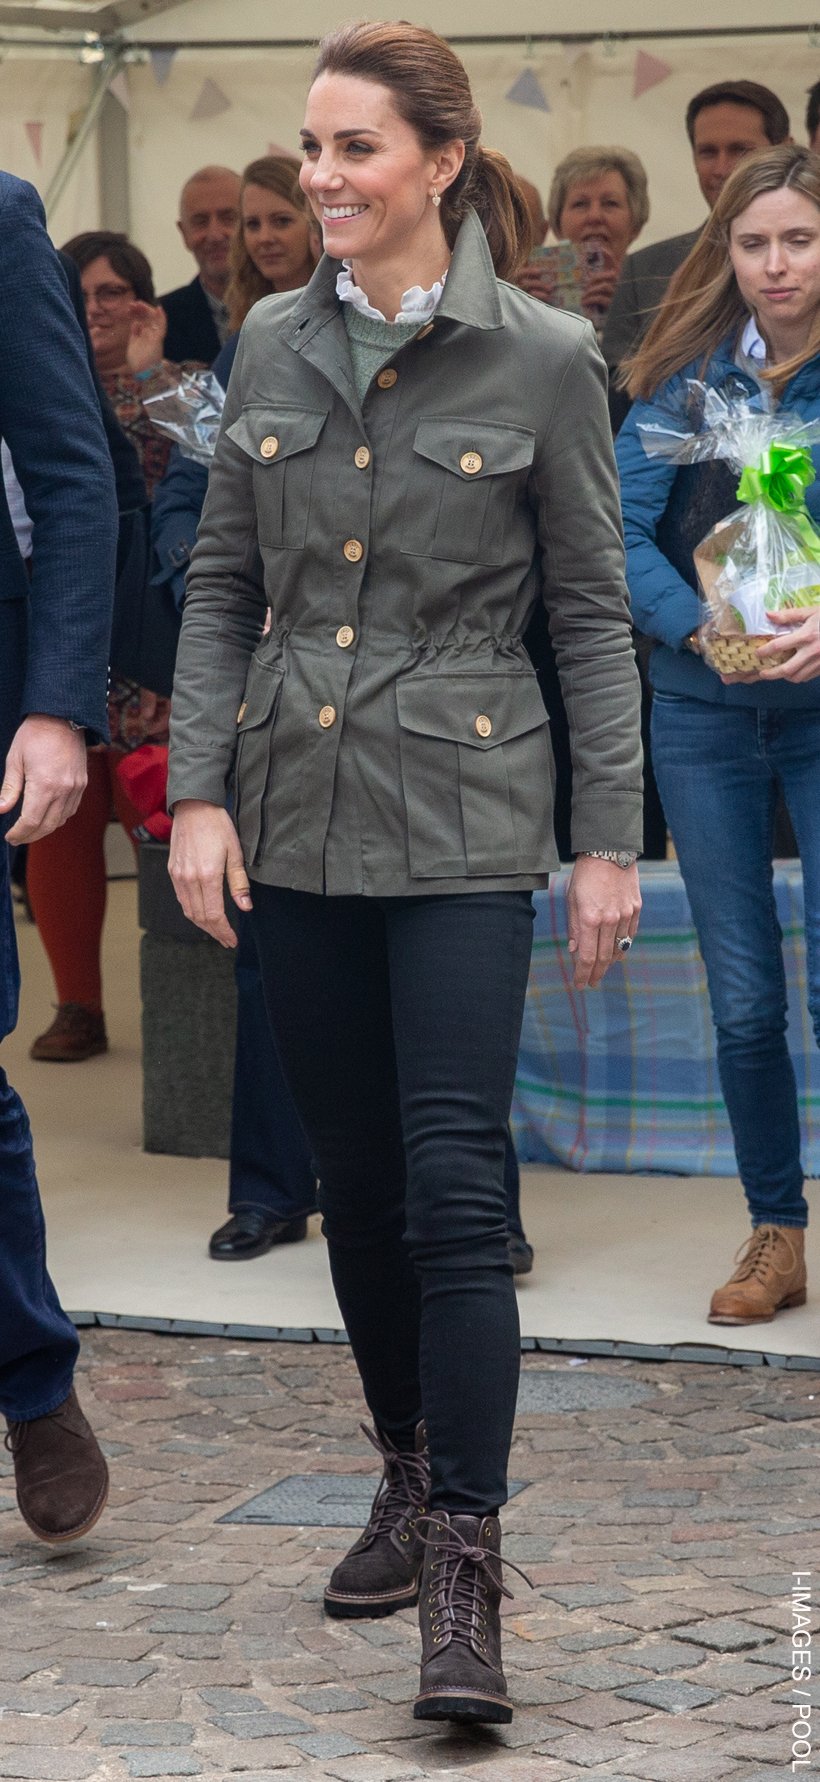 Kate Middleton dressed casually wearing the Troy London Tracker jacket in olive green